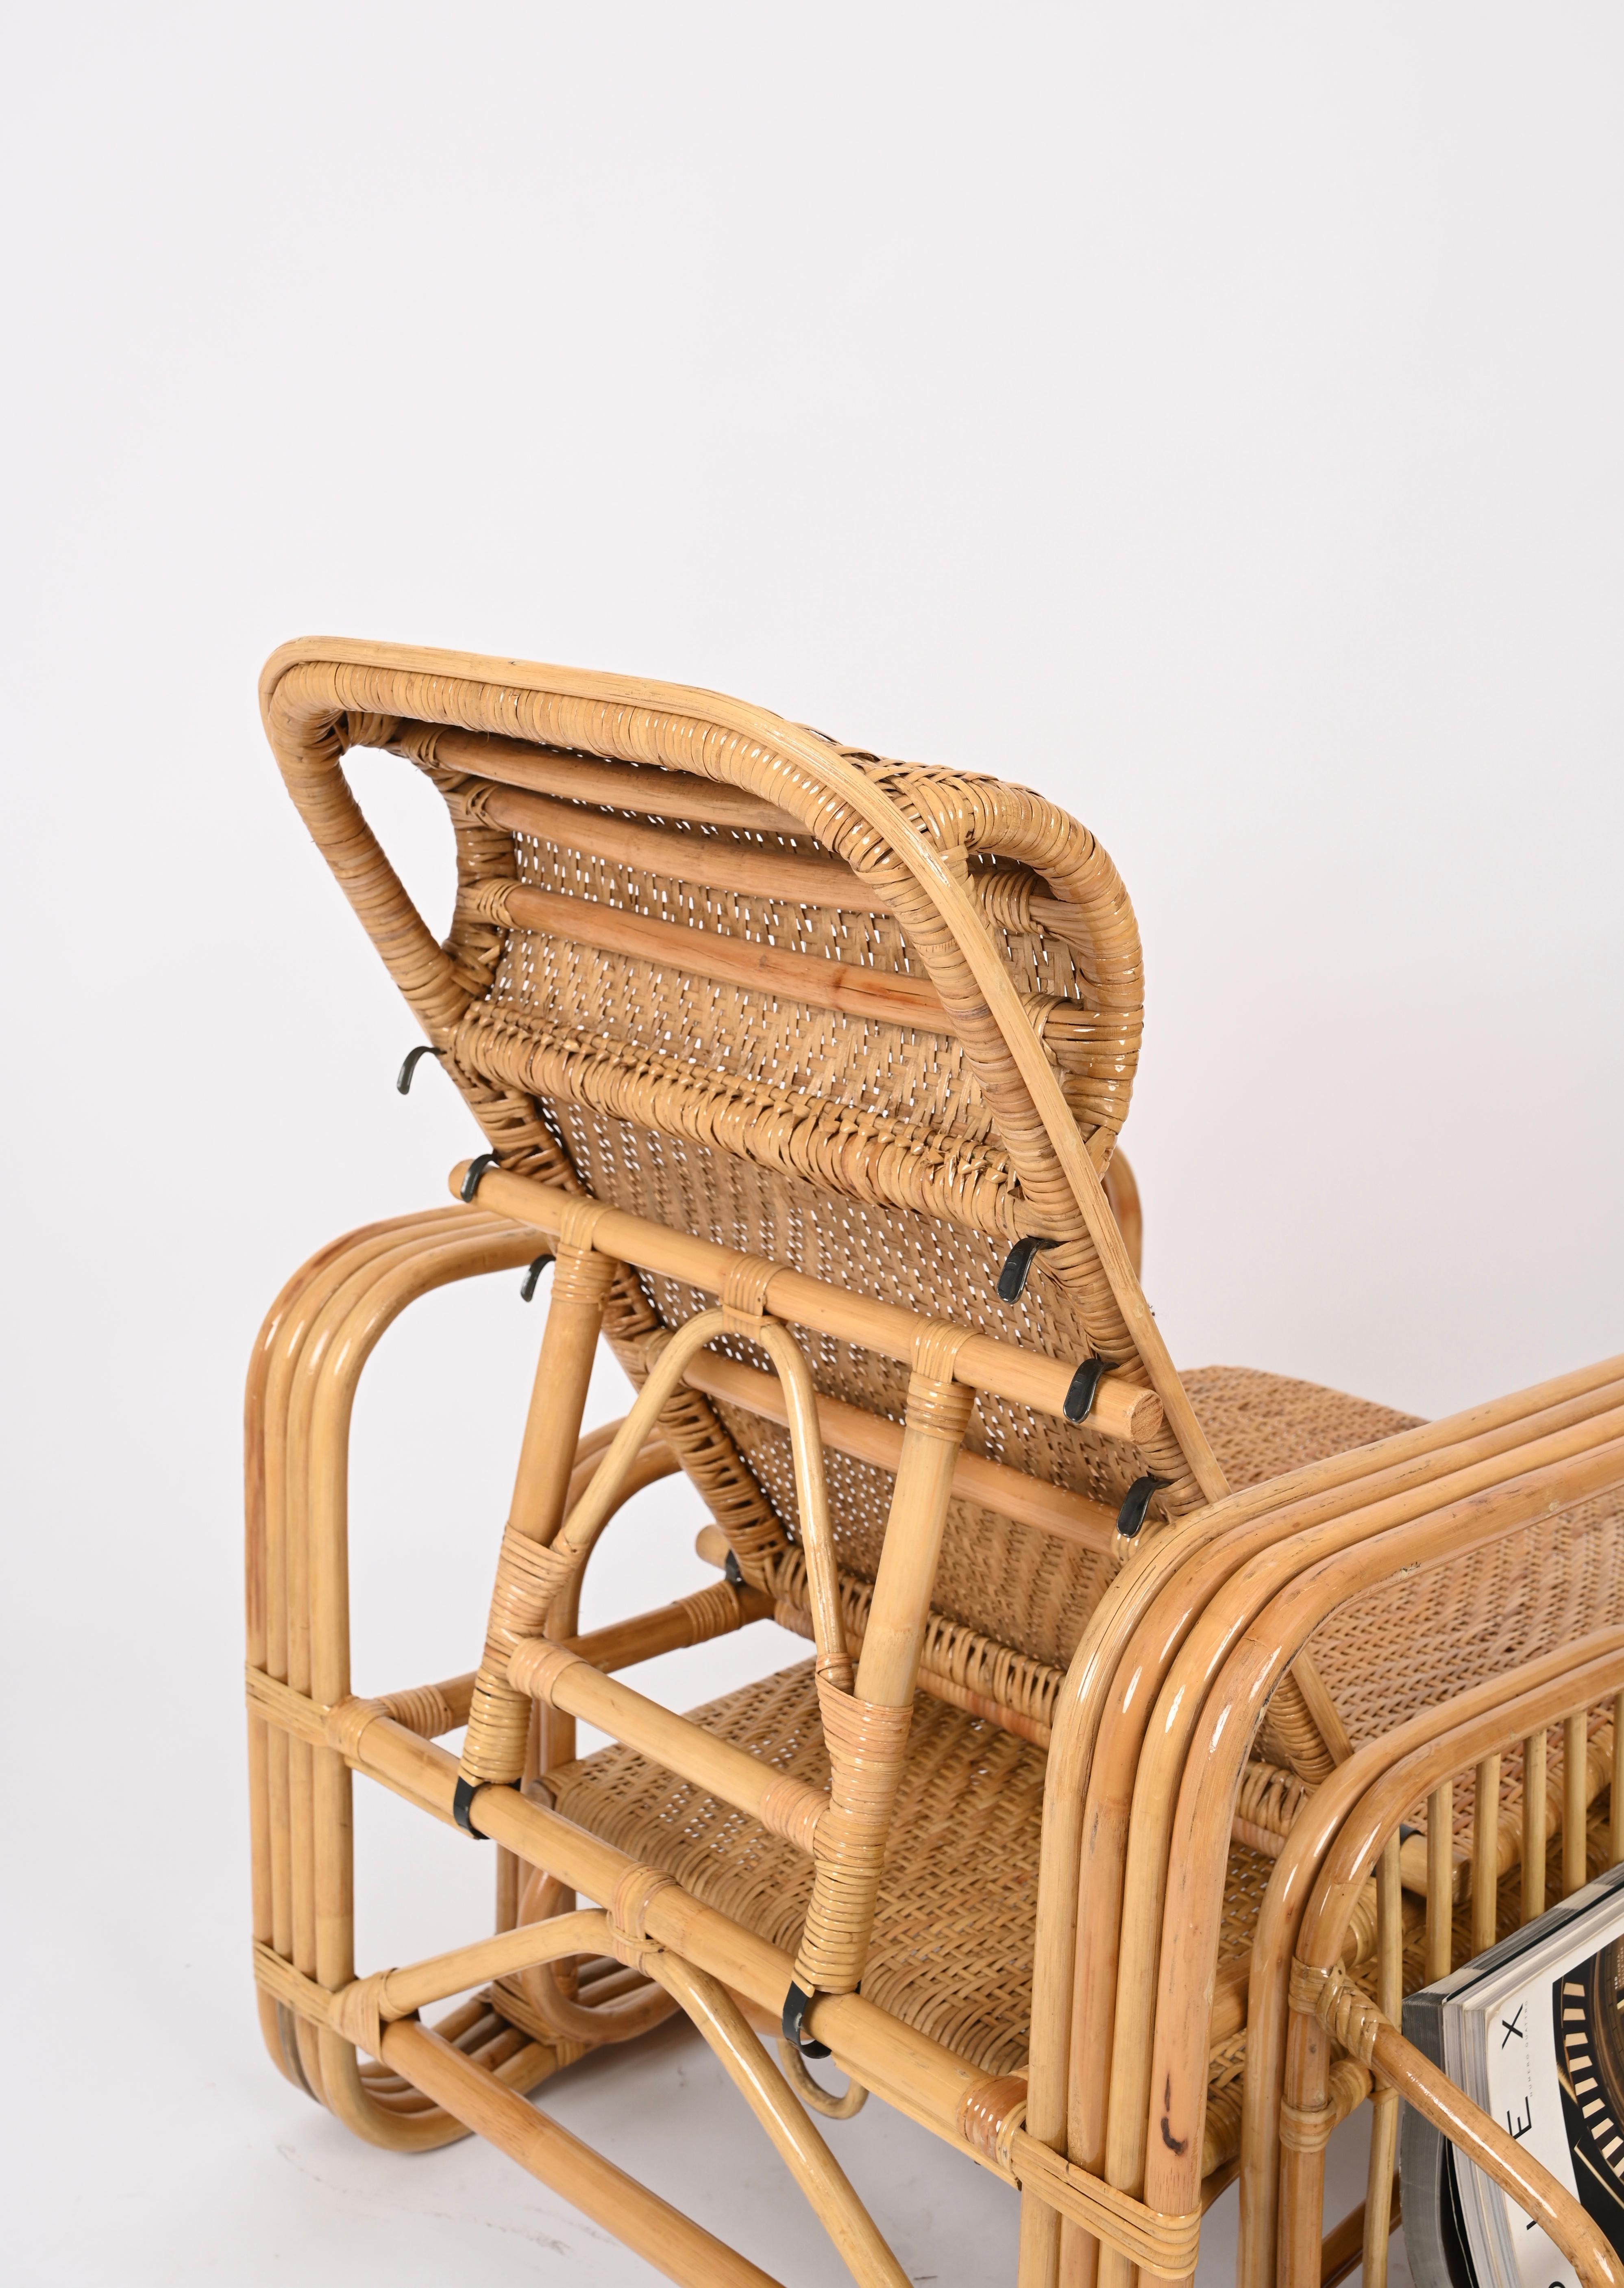 Adjustable Chaise Longue / Lounge Chair in Woven Wicker and Rattan, Italy 1970s  For Sale 3